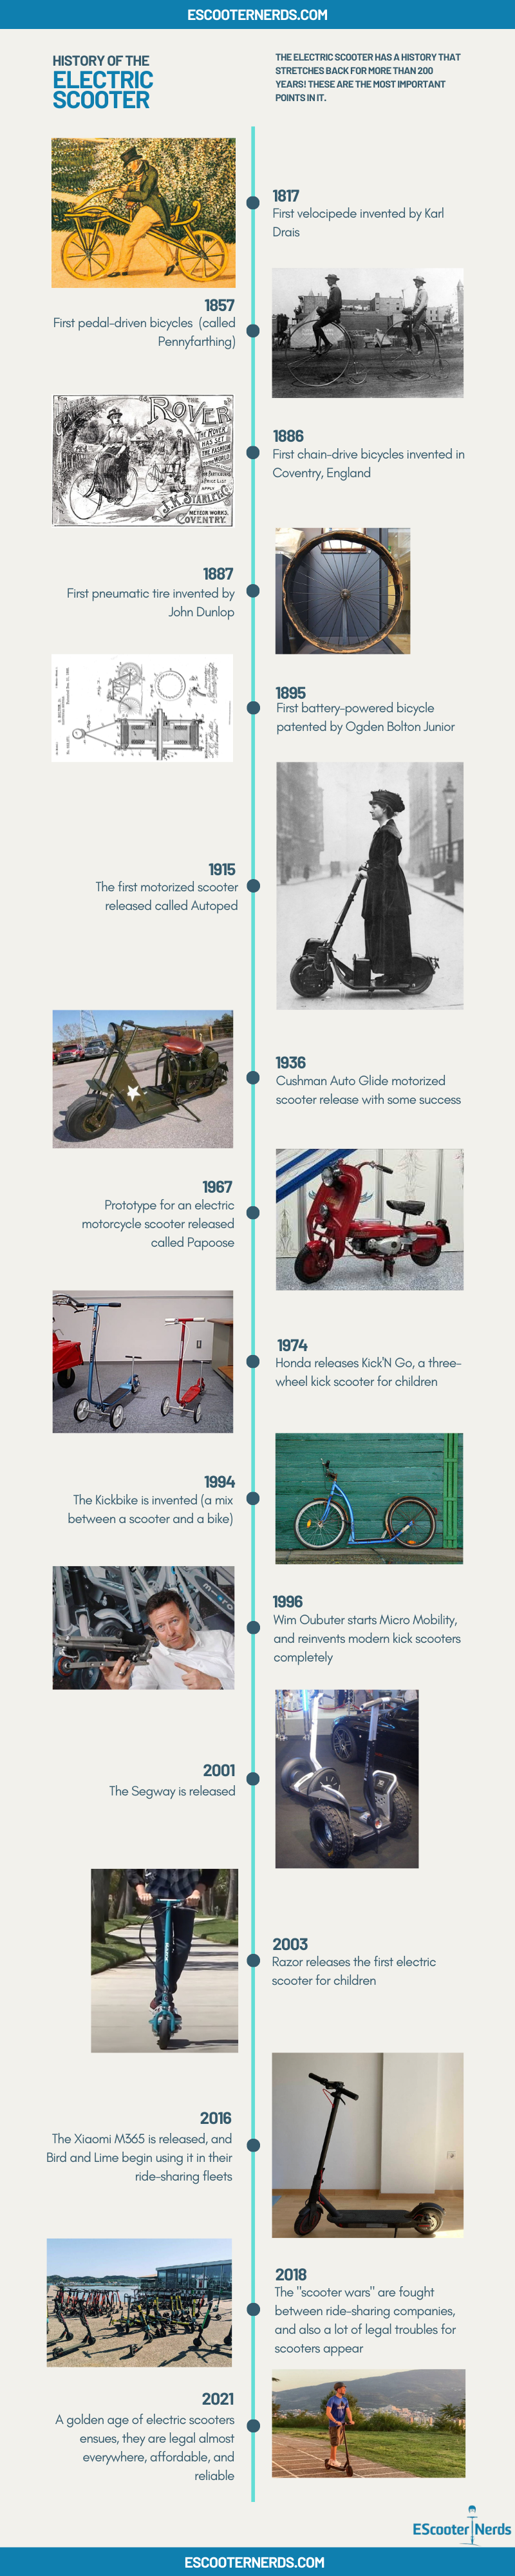 complete history of the electric scooter - infographic